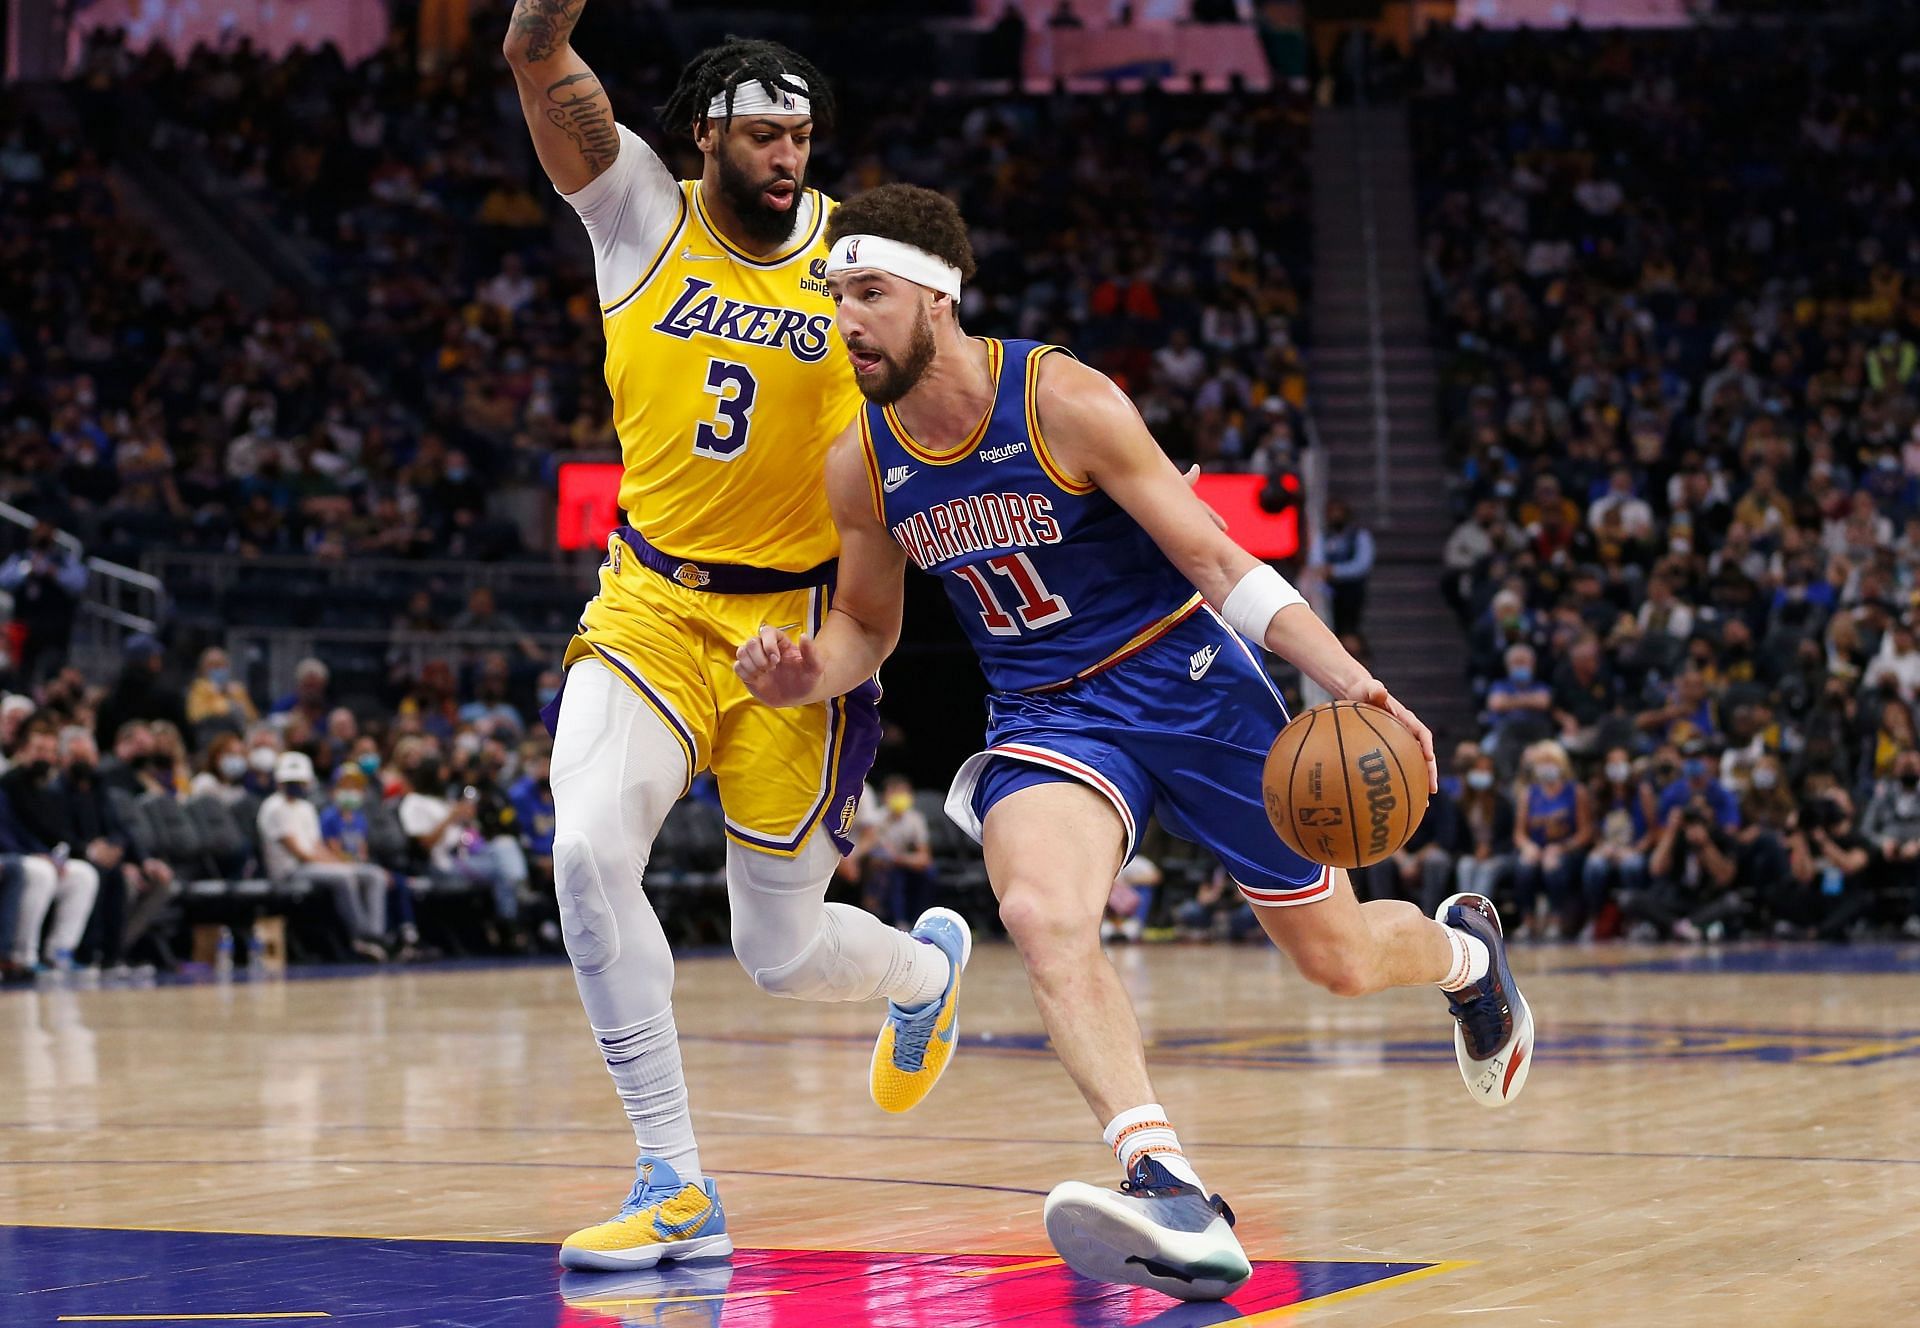 Klay Thompson of the Golden State Warriors drives to the basket against Anthony Davis of the LA Lakers in the second half on Feb. 12, 2022, in San Francisco, California.